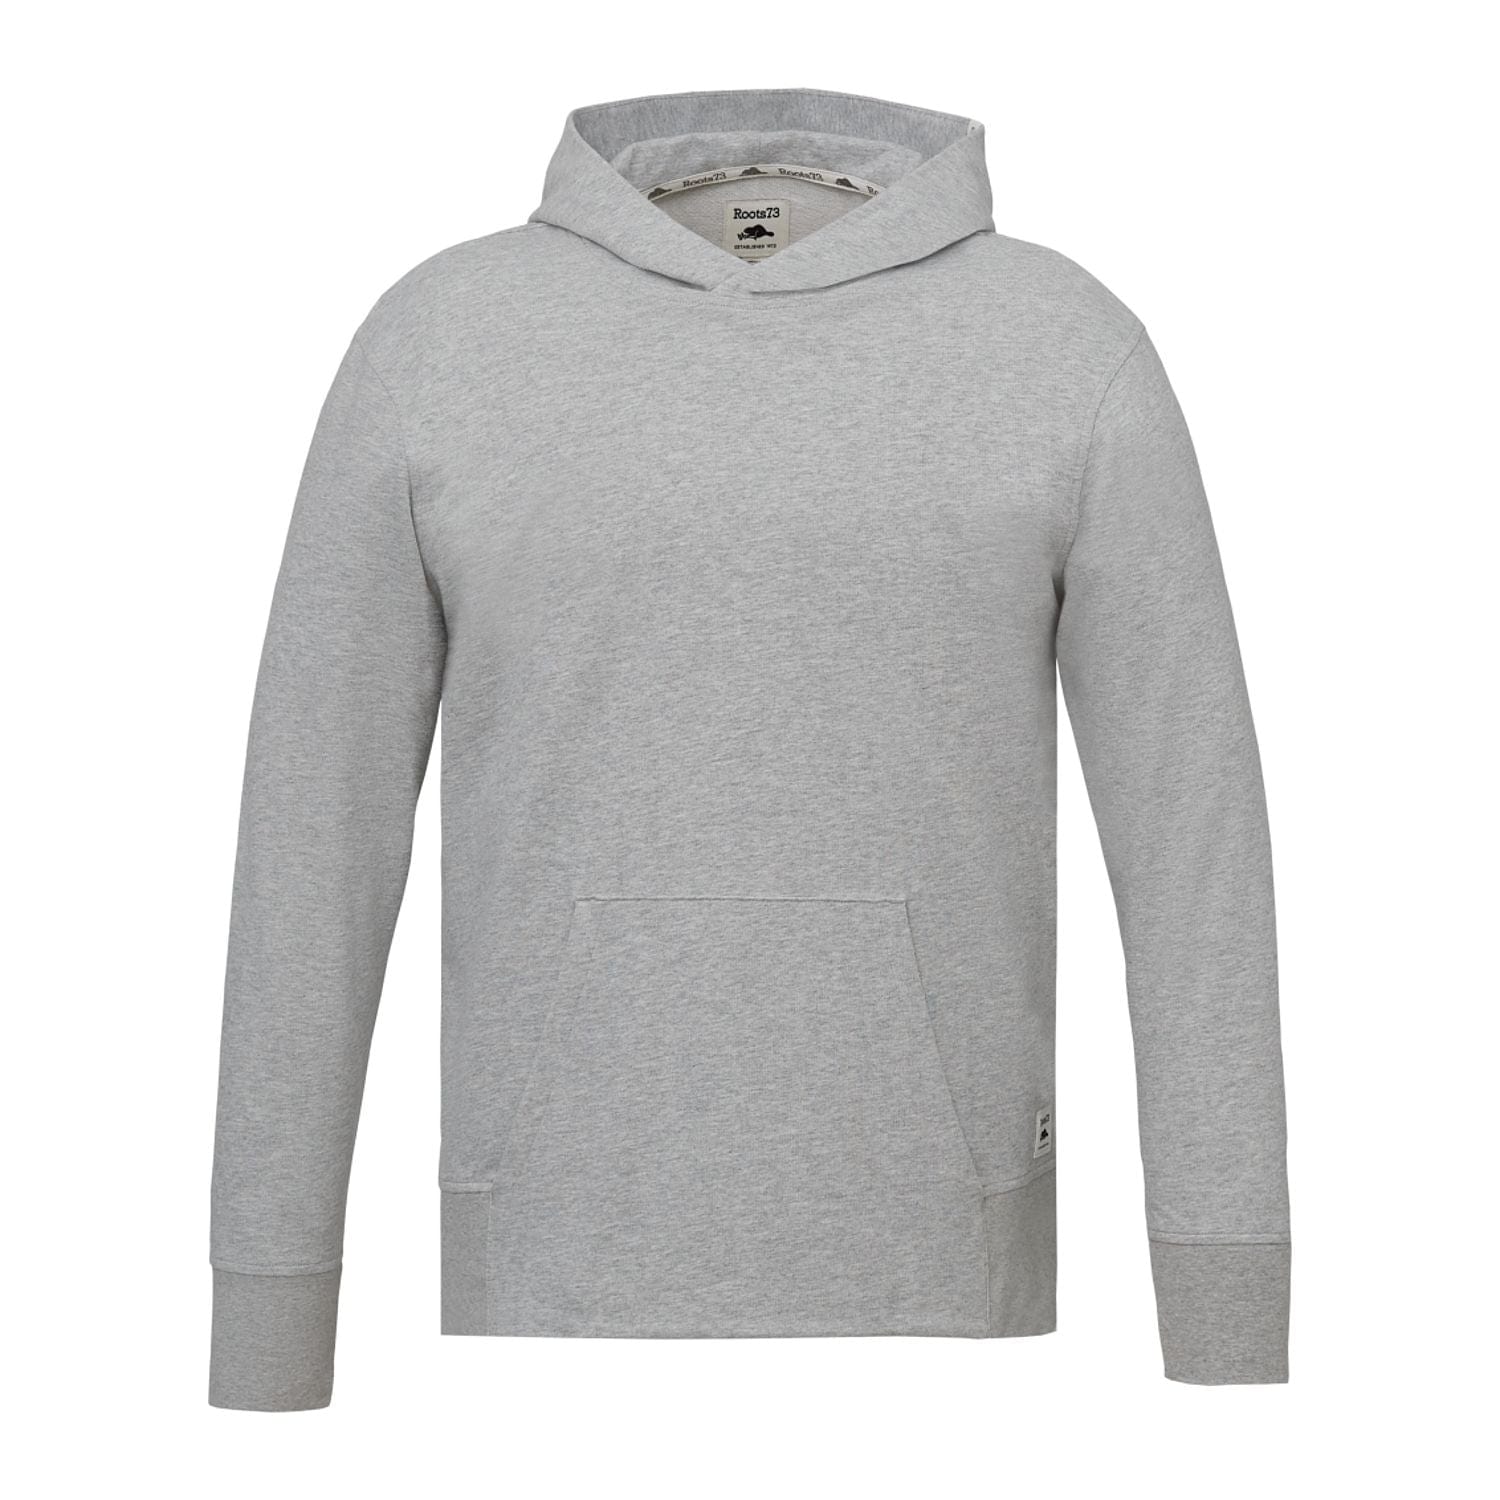 Roots Sweatshirts XS / Grey Mix Roots73 - CANMORE Eco Hoody